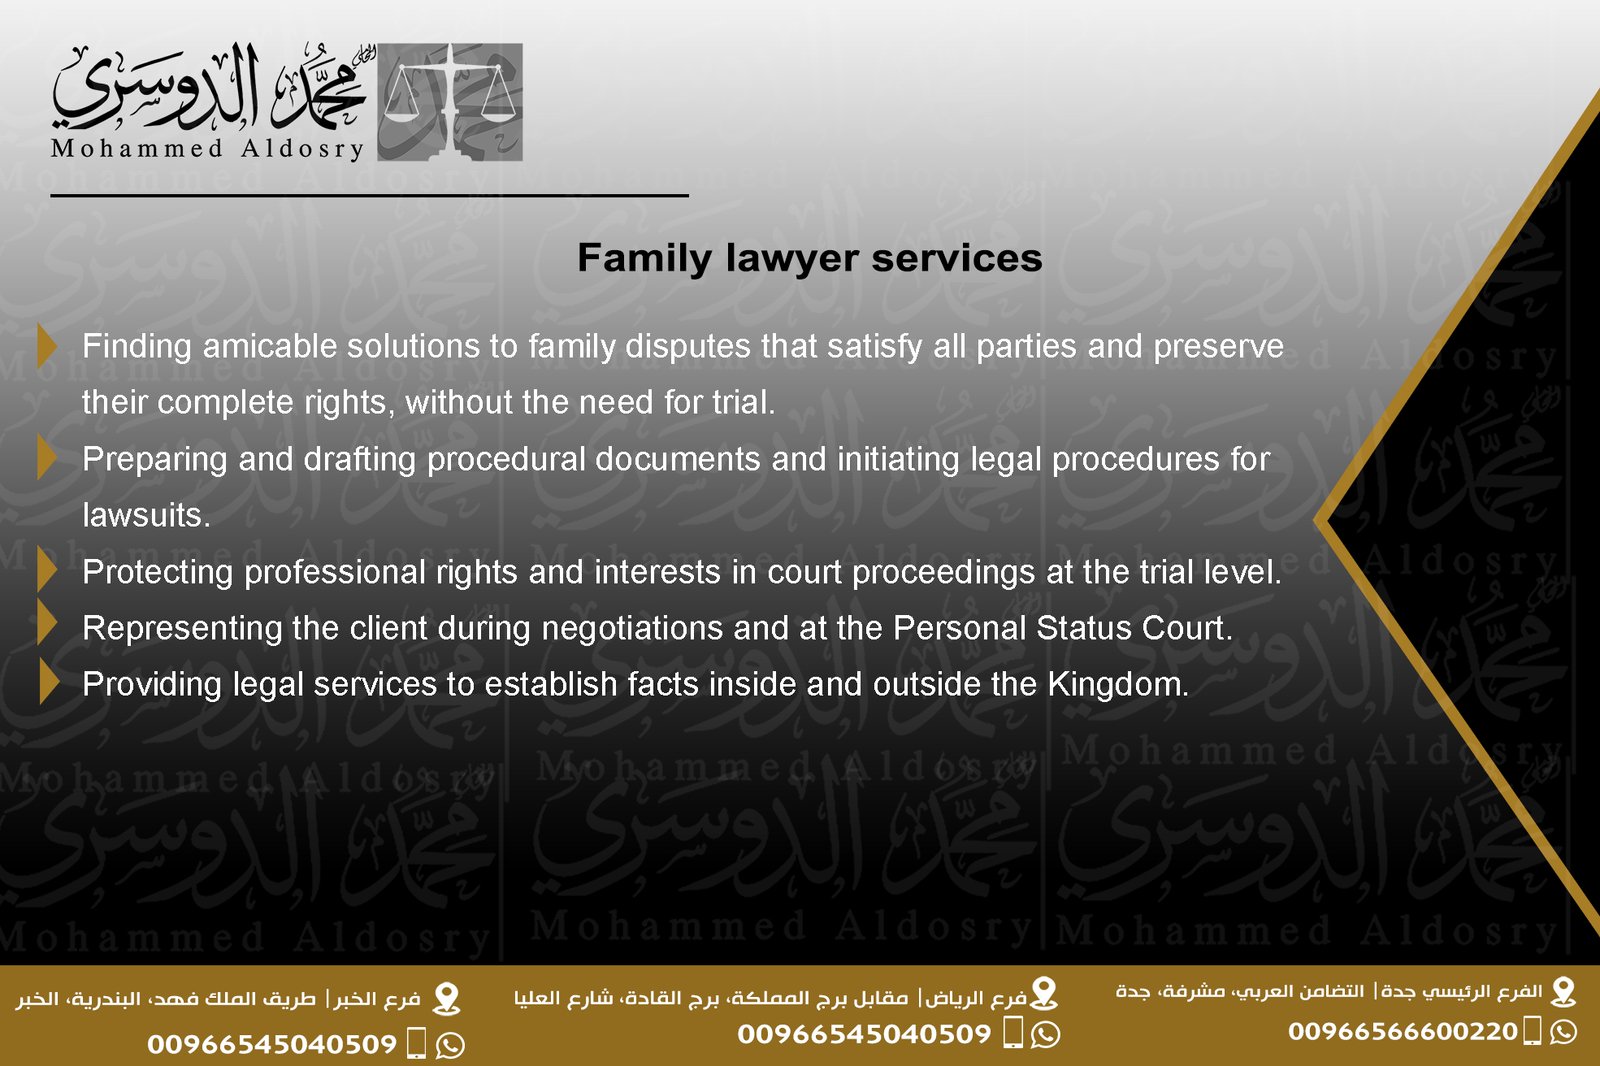 Family lawyer services